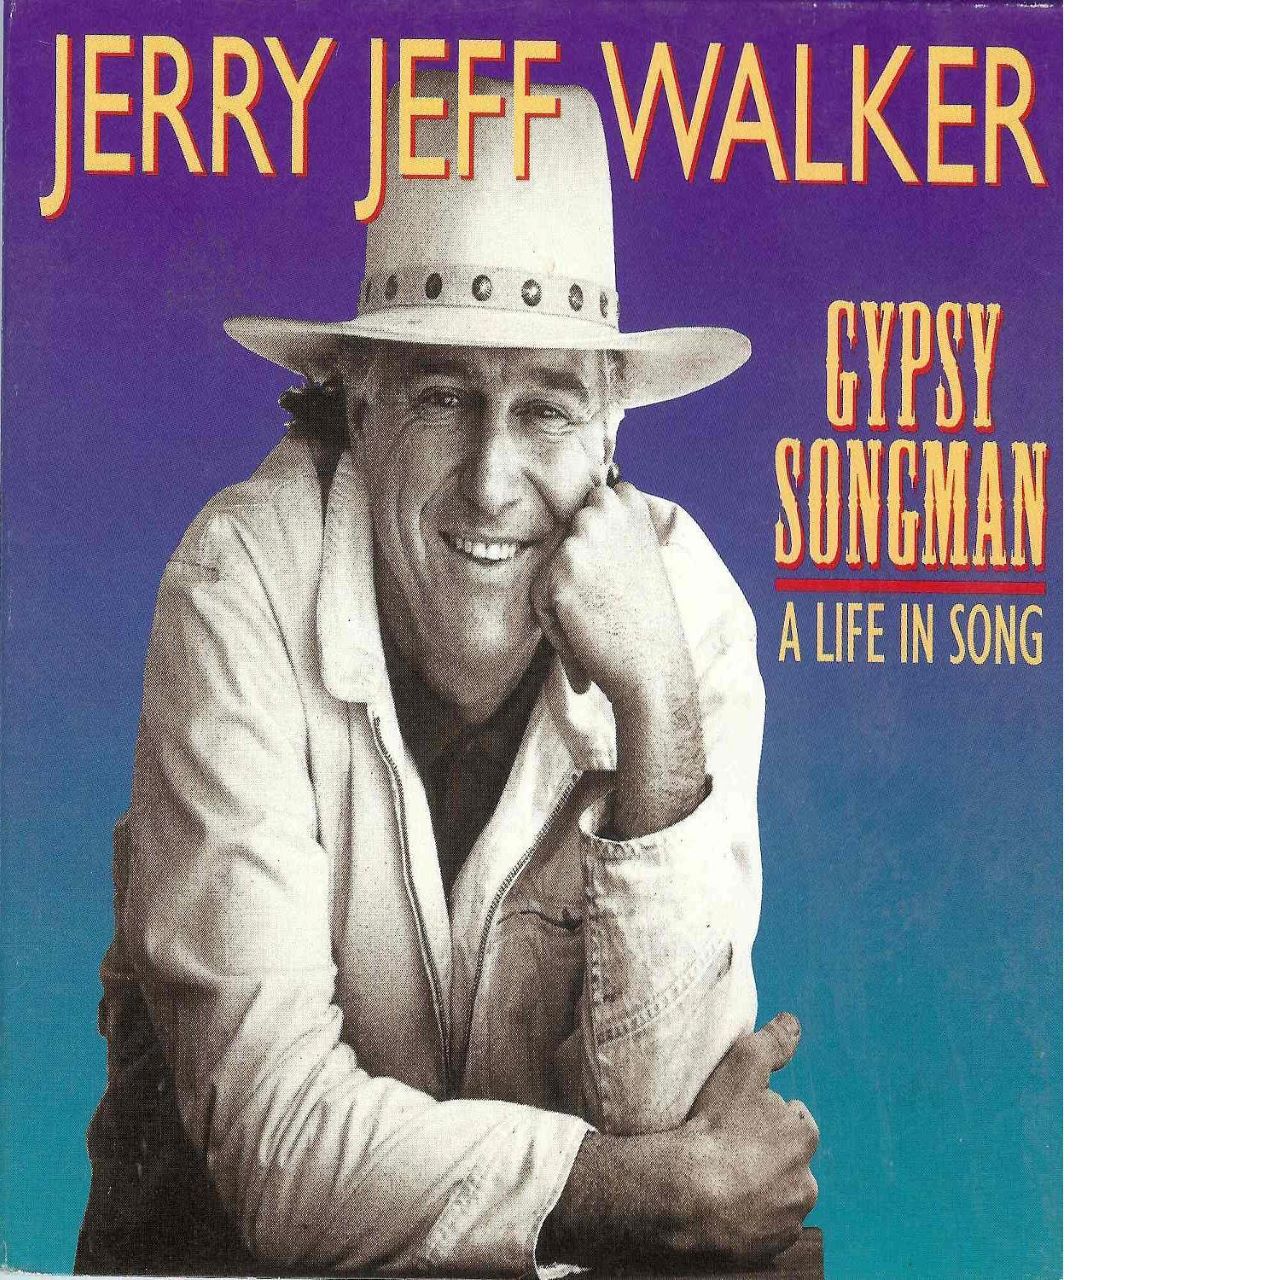 Jerry Jeff Walker - Gypsy Songman - A Life In Song cover album